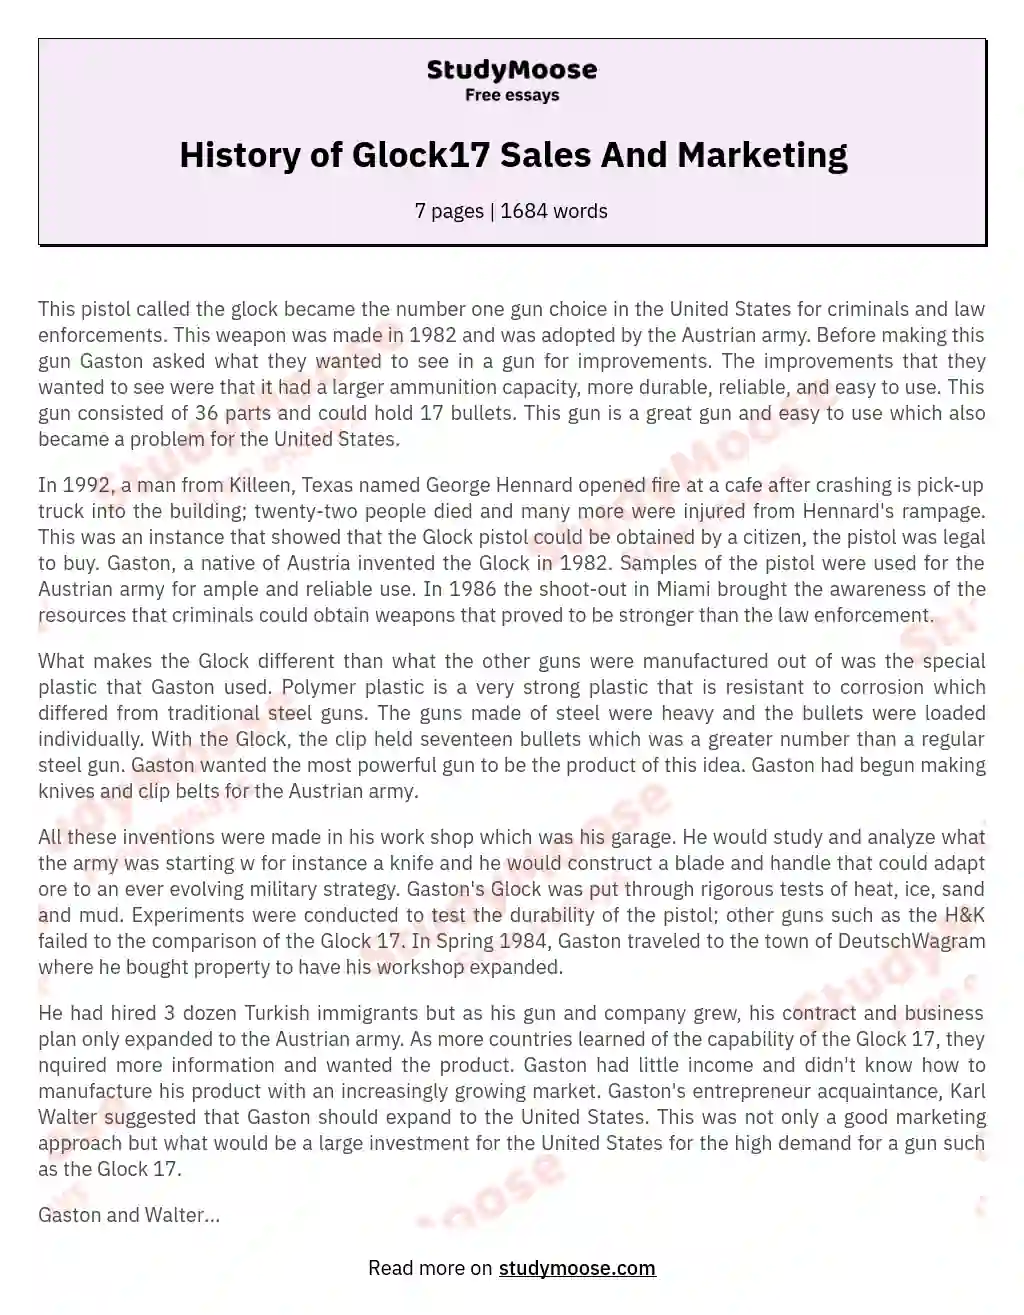 History of Glock17 Sales And Marketing essay